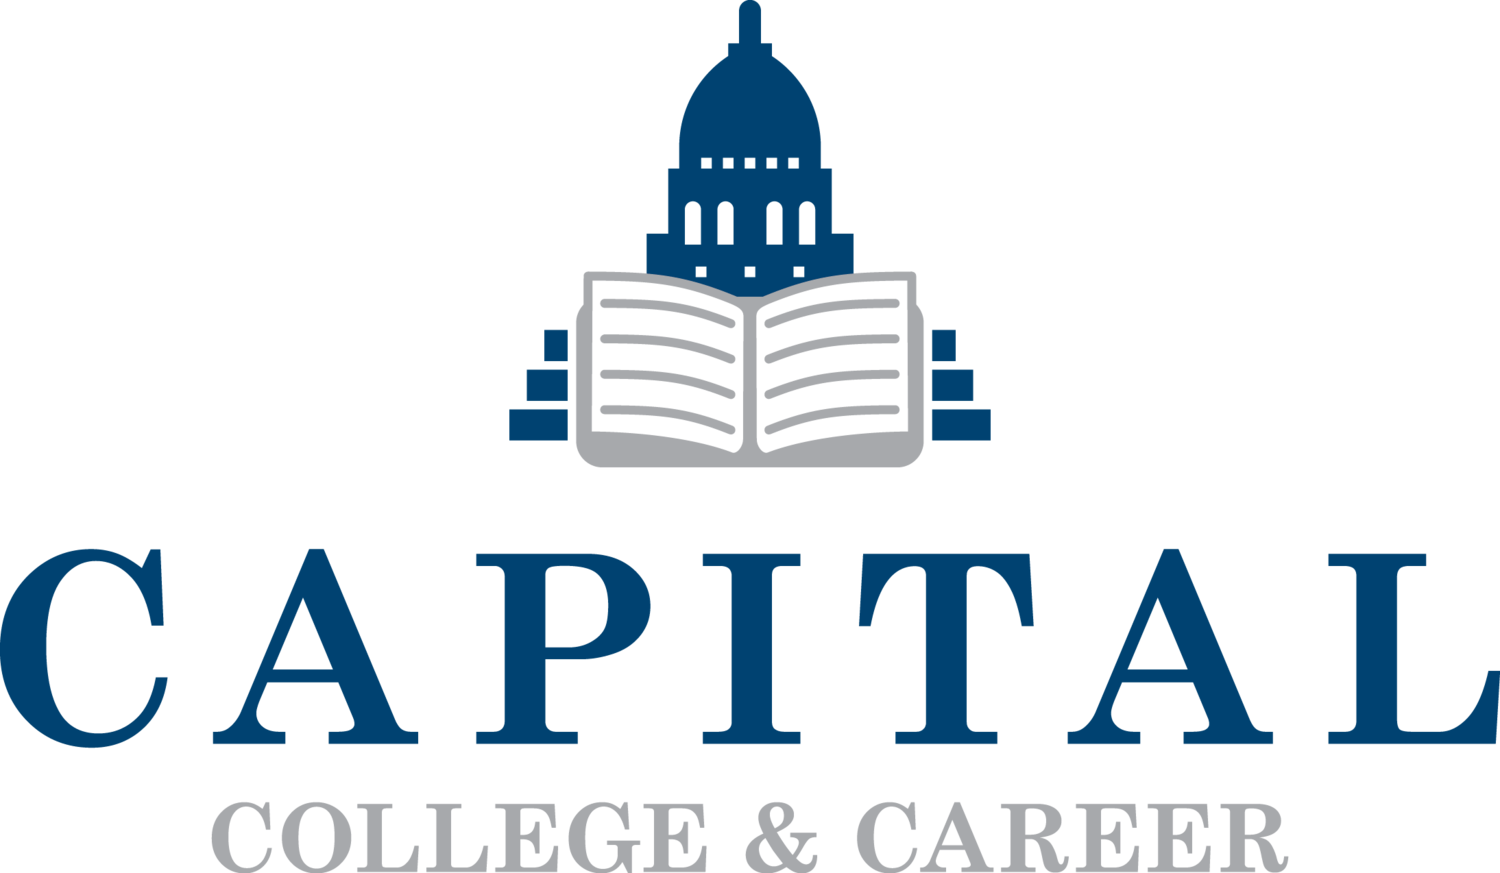 Capital College and career